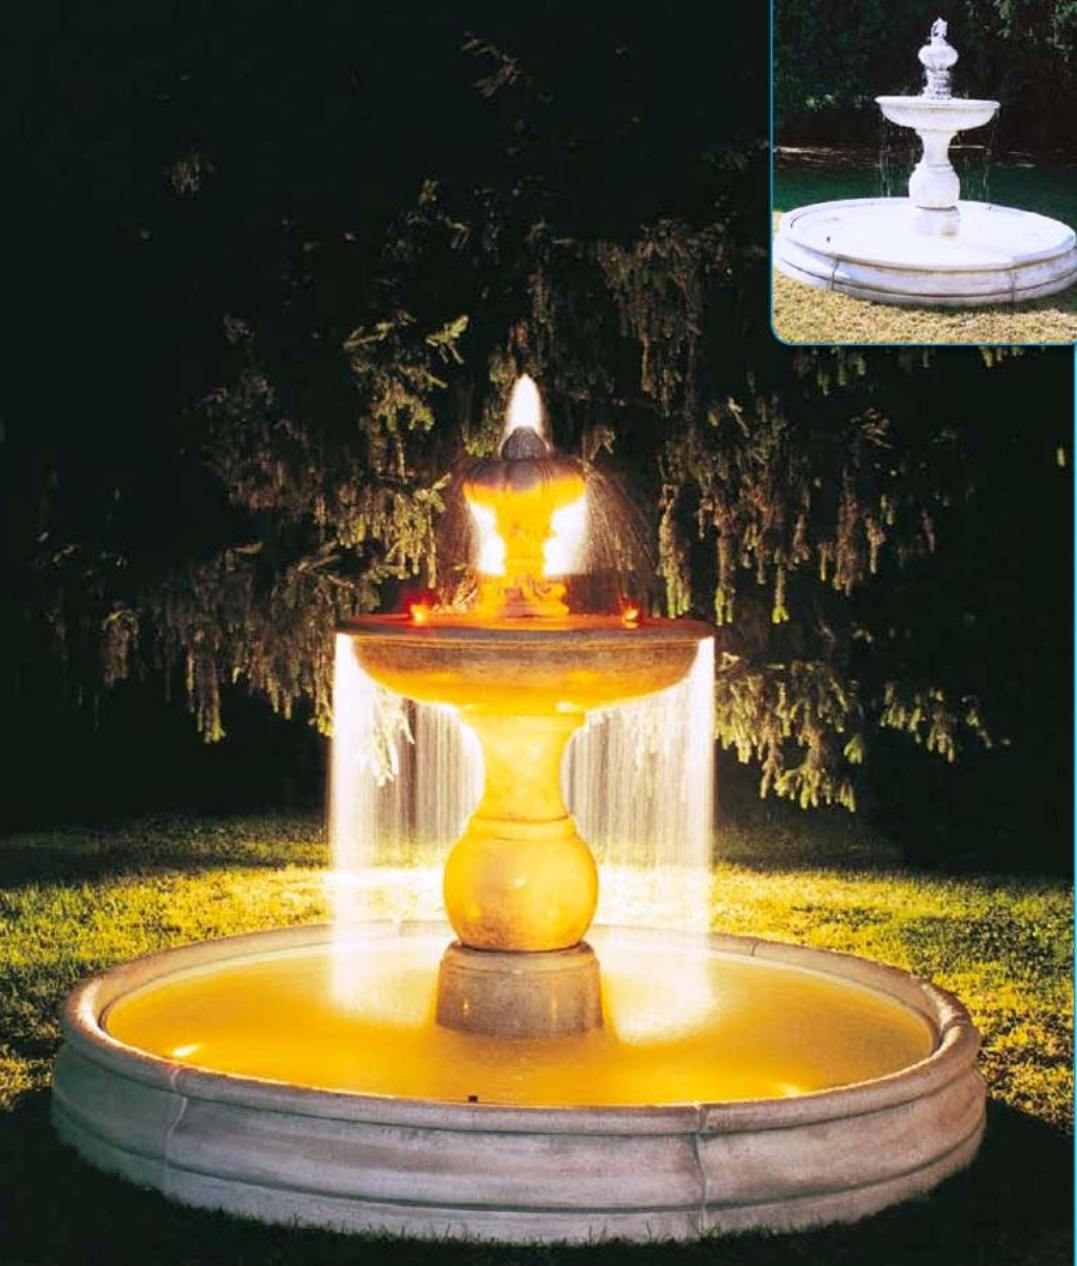 tiered fountain two tires italian vila art large pool fountains